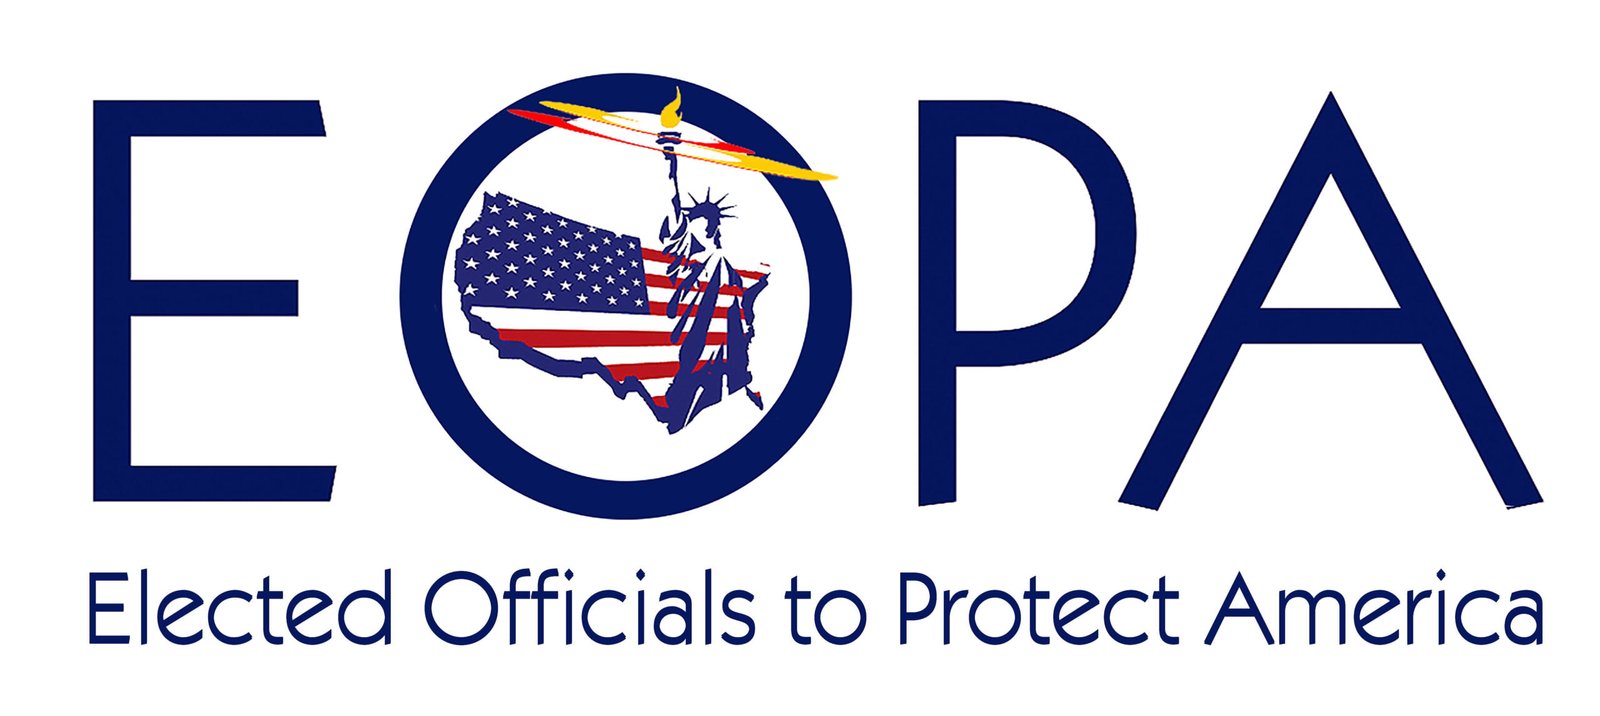 EOPA-Elected-Officials-to-Protect-America1-4-scaled.jpg